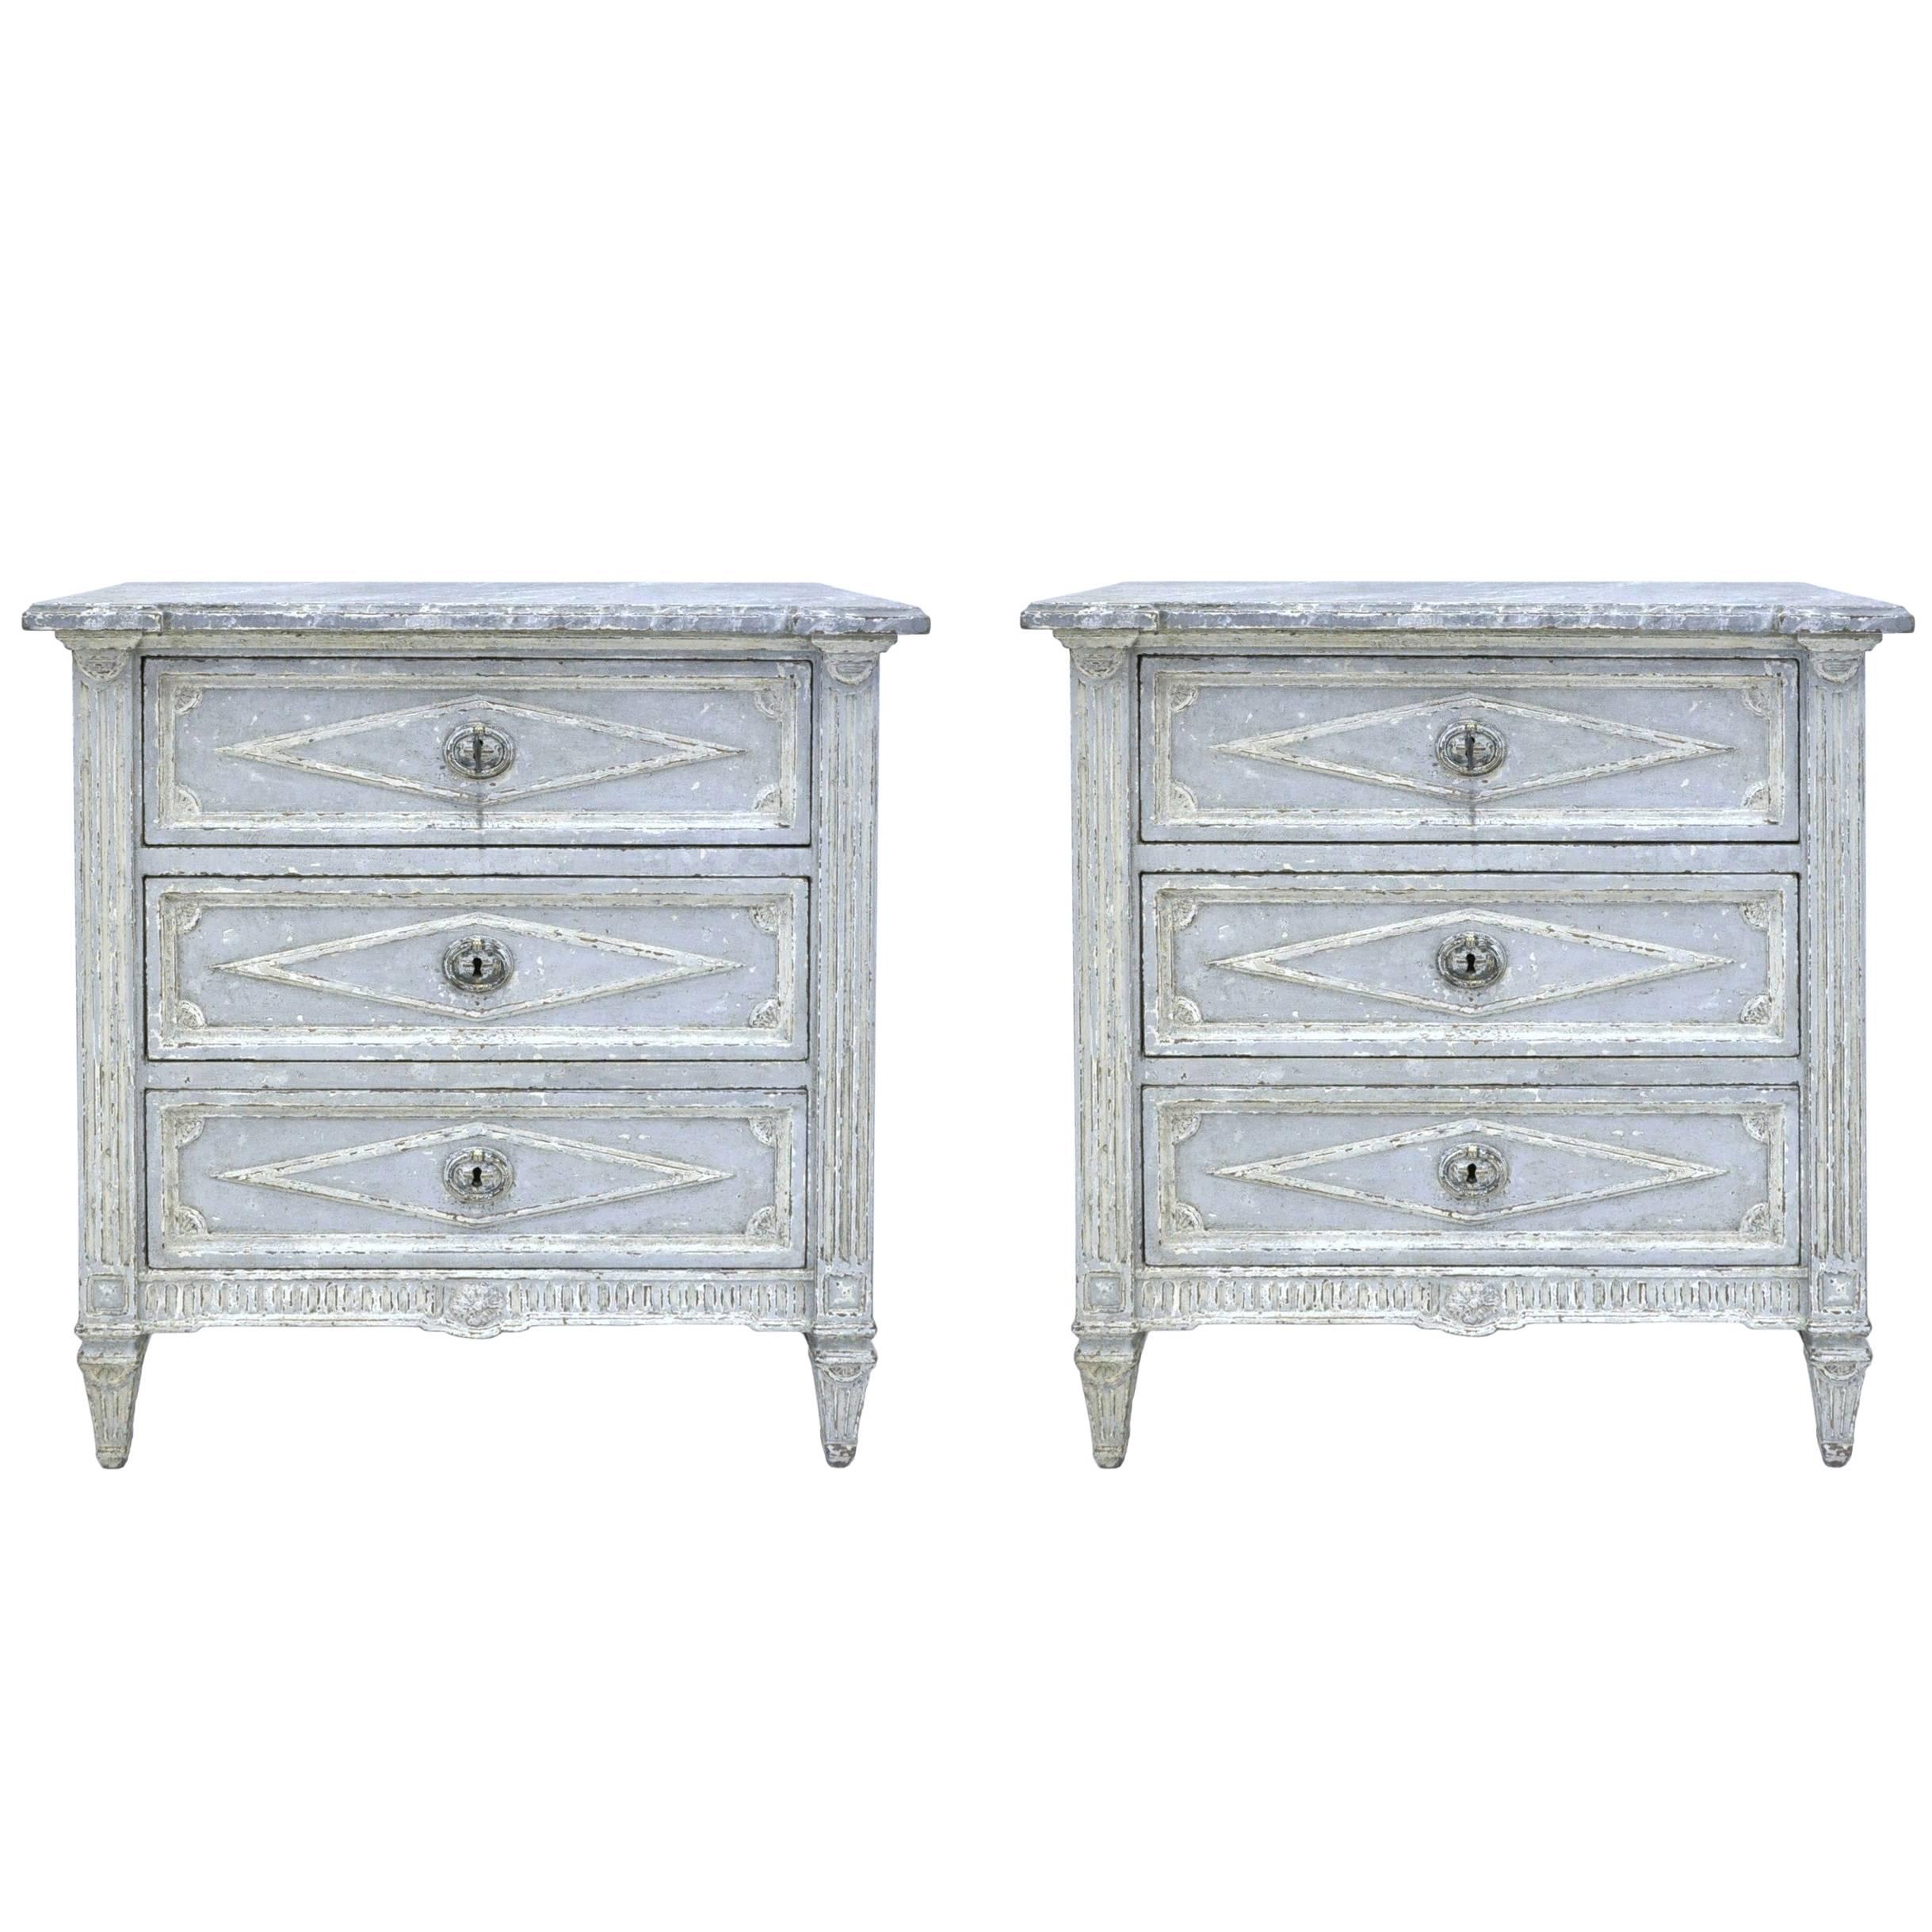 Pair of 19th Century Painted Louis XVI Nightstands or Bedside Tables